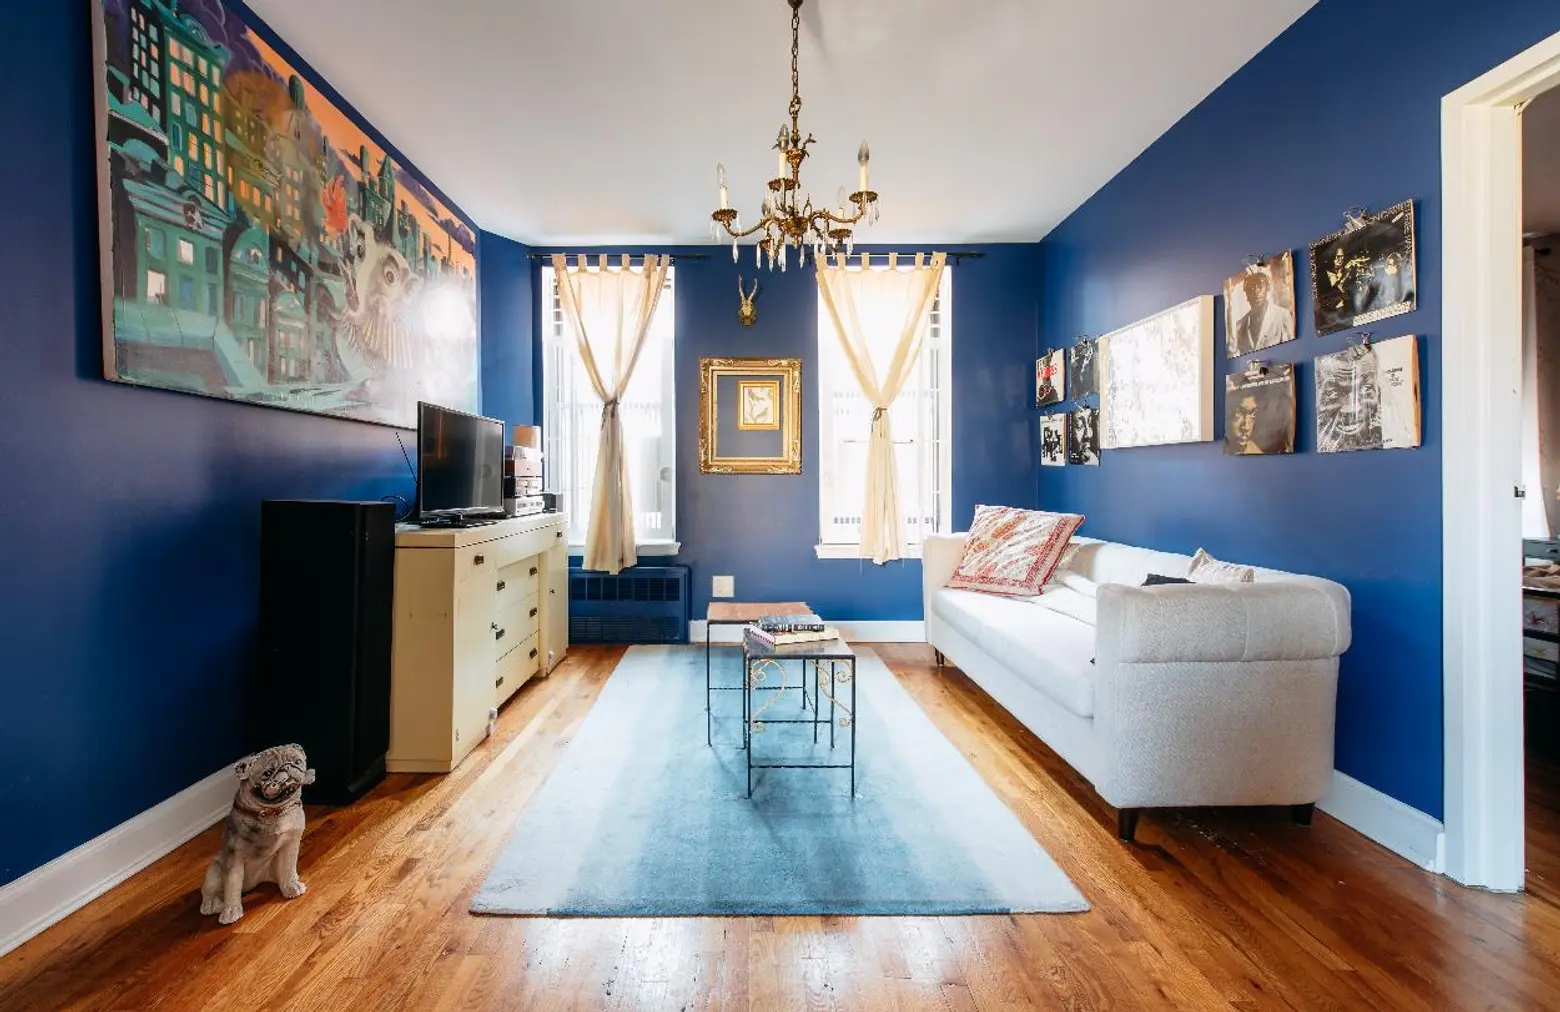 Two-Bedroom East Village Co-op Asks Just $695,000, but There’s a Catch